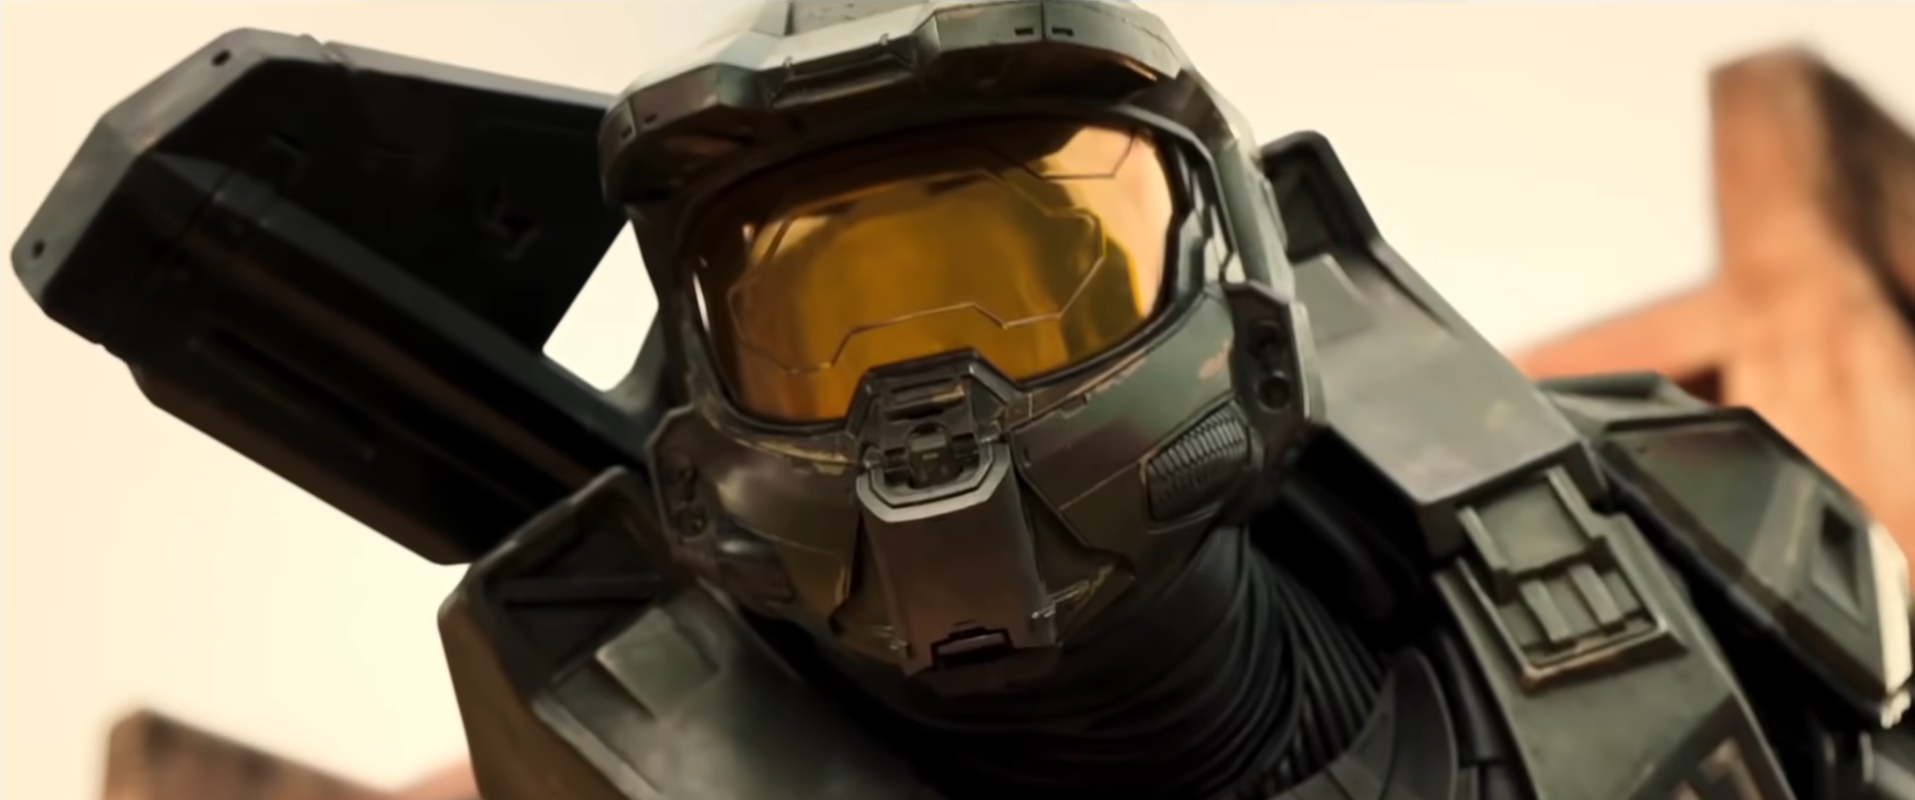 Pablo Schreiber: Filming of the second season of "Halo" will begin in summer